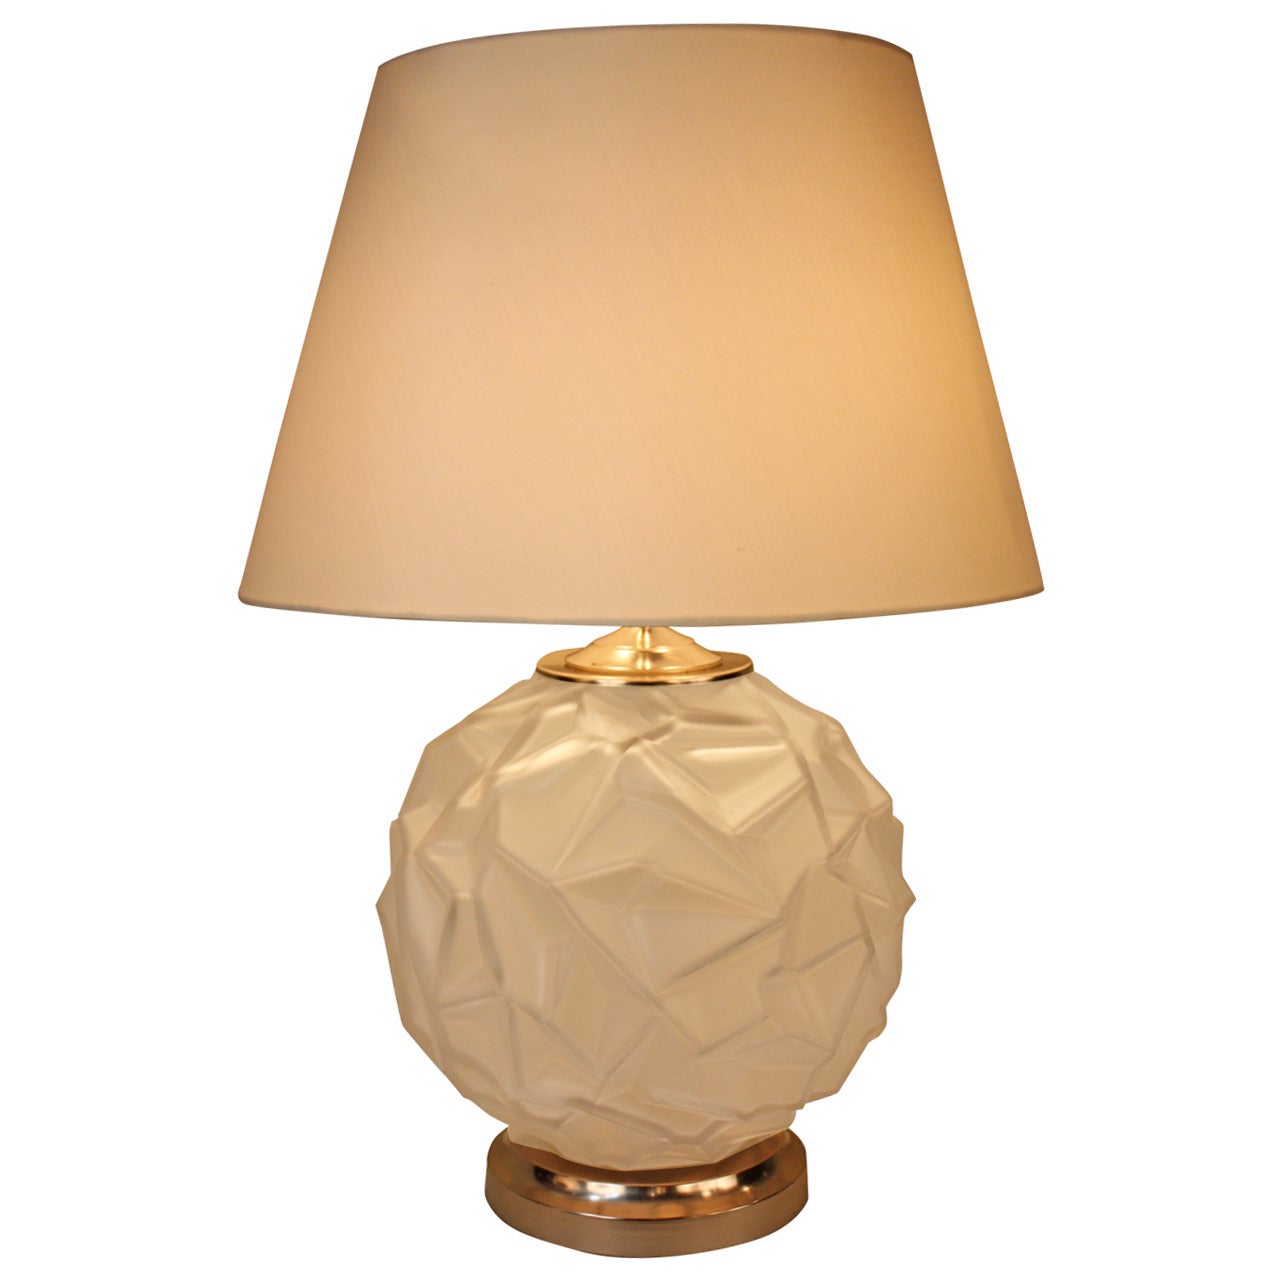 Art Deco Vase Mounted as a Table Lamp